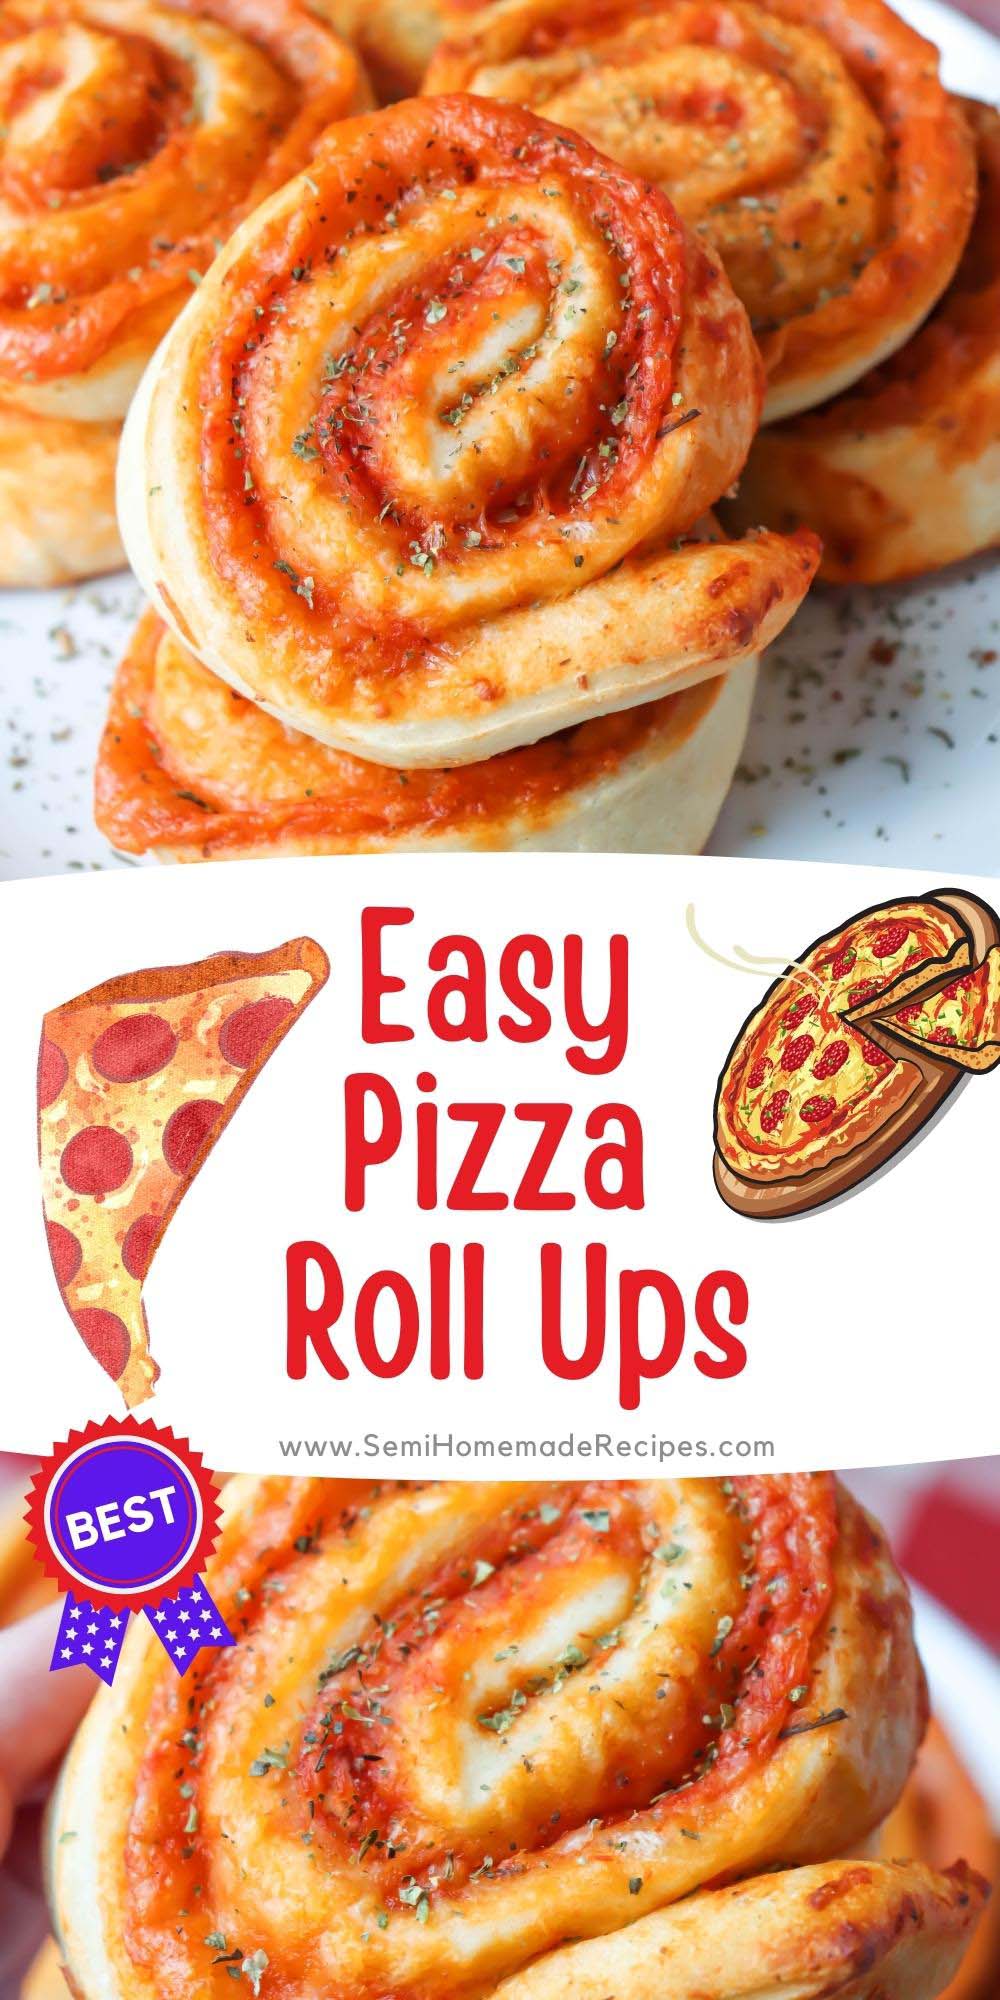 Give these easy Pizza Roll Ups a try for the perfect lunch or afternoon snack! Pizza dough is covered in mozzarella cheese and pizza sauce before being rolled and baked into the perfect bite! Great Served with warm pizza sauce for dipping!